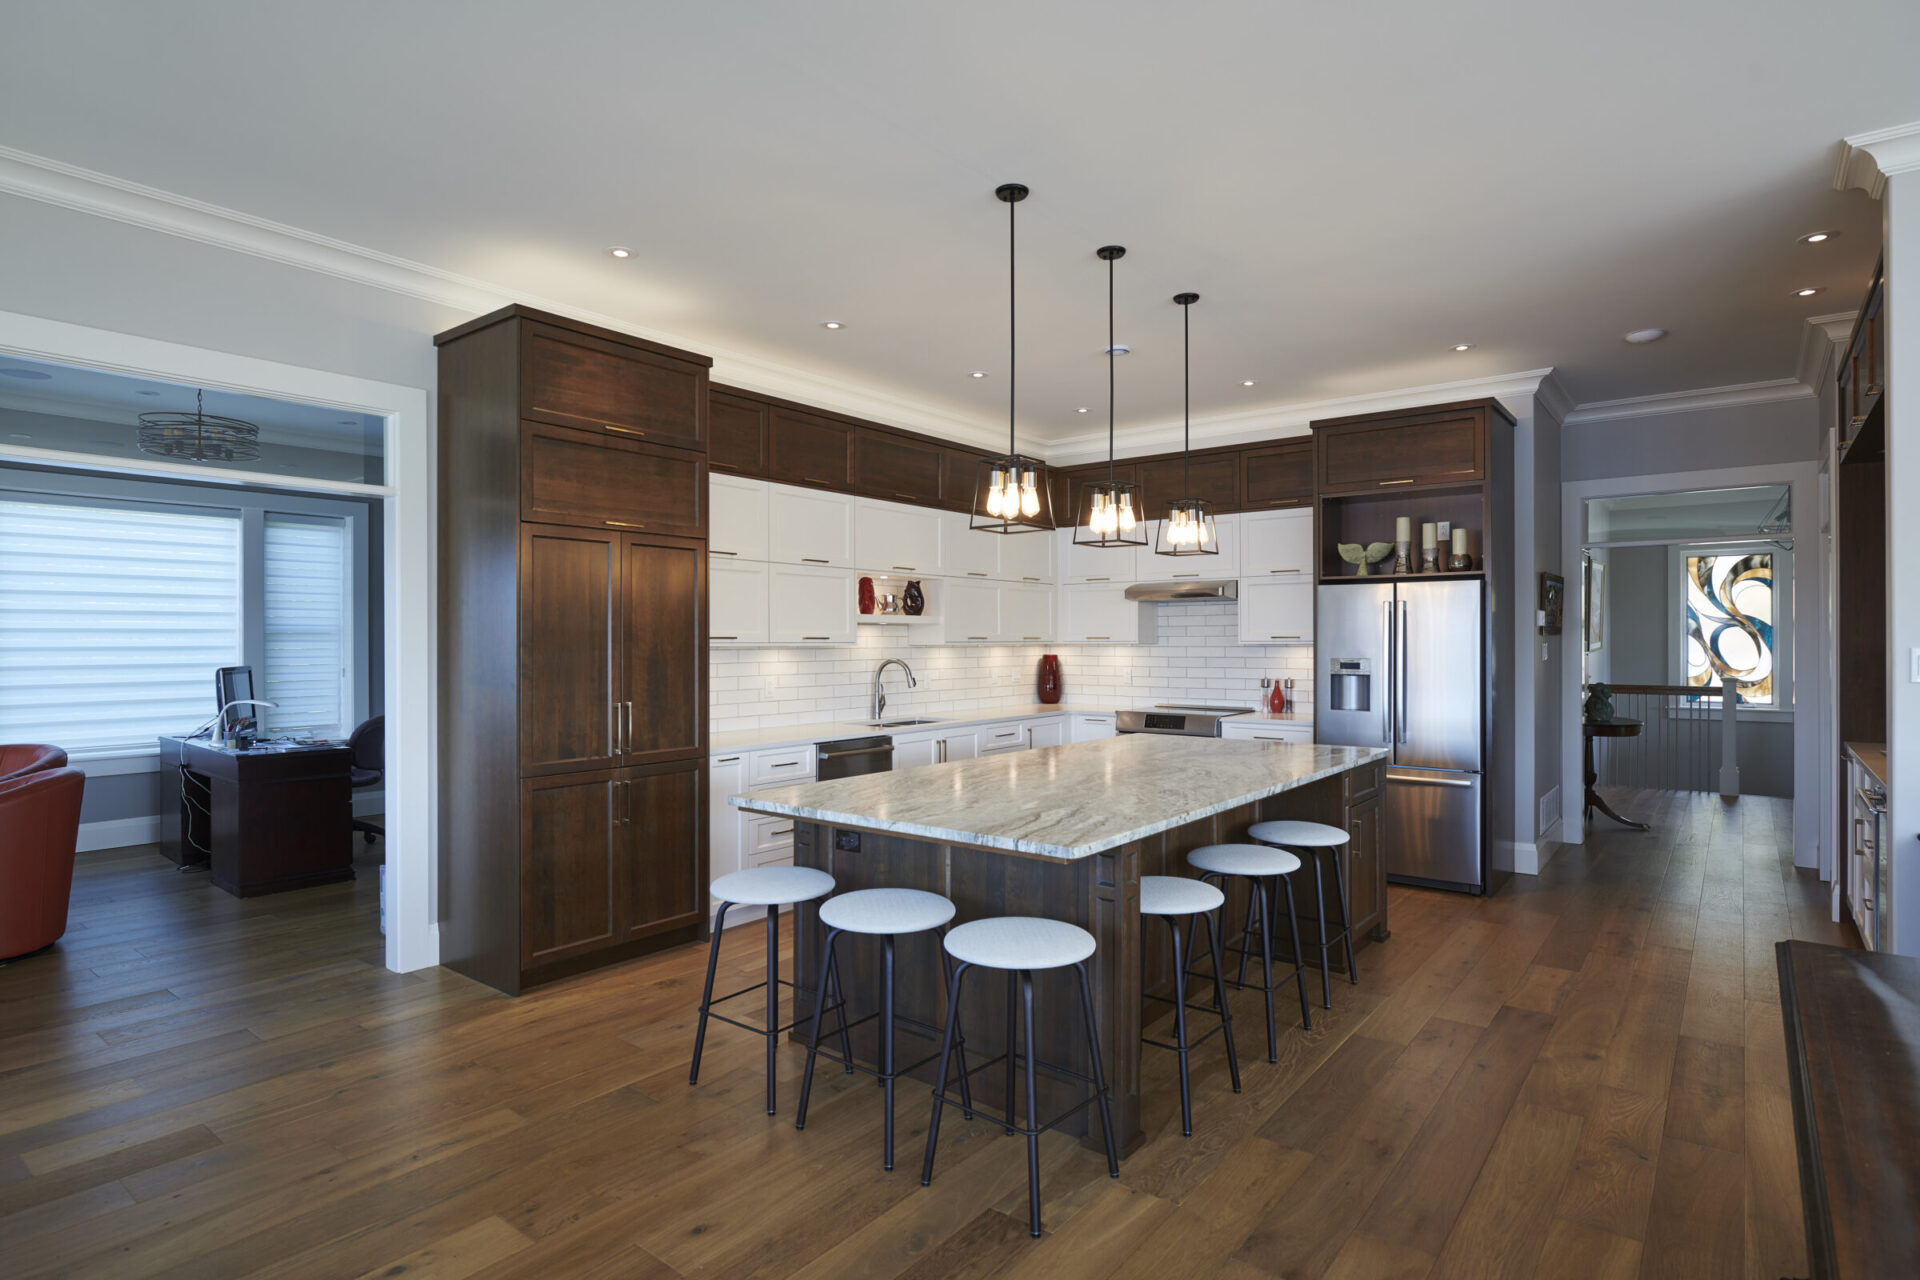 This image shows a spacious kitchen with white cabinets, dark wood furniture, stainless steel appliances, bar stools, and pendant lighting.